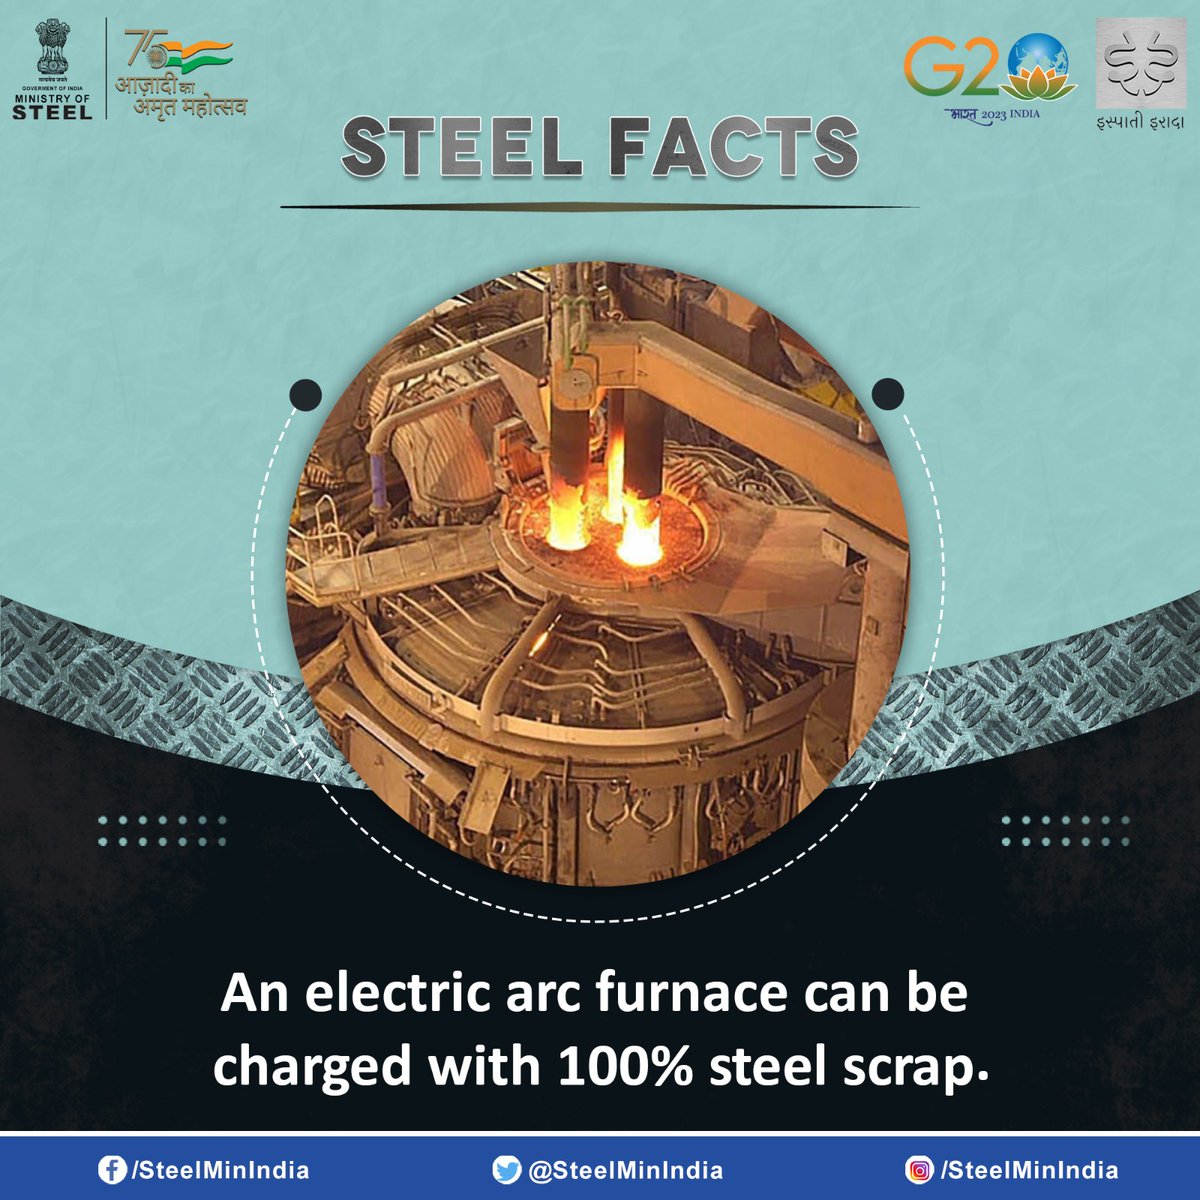 Check out these incredible steel facts and learn why it's the backbone of modern industry! 

#SteelIndustry #Amazing #Facts #SteelFacts #Strength #Versatility